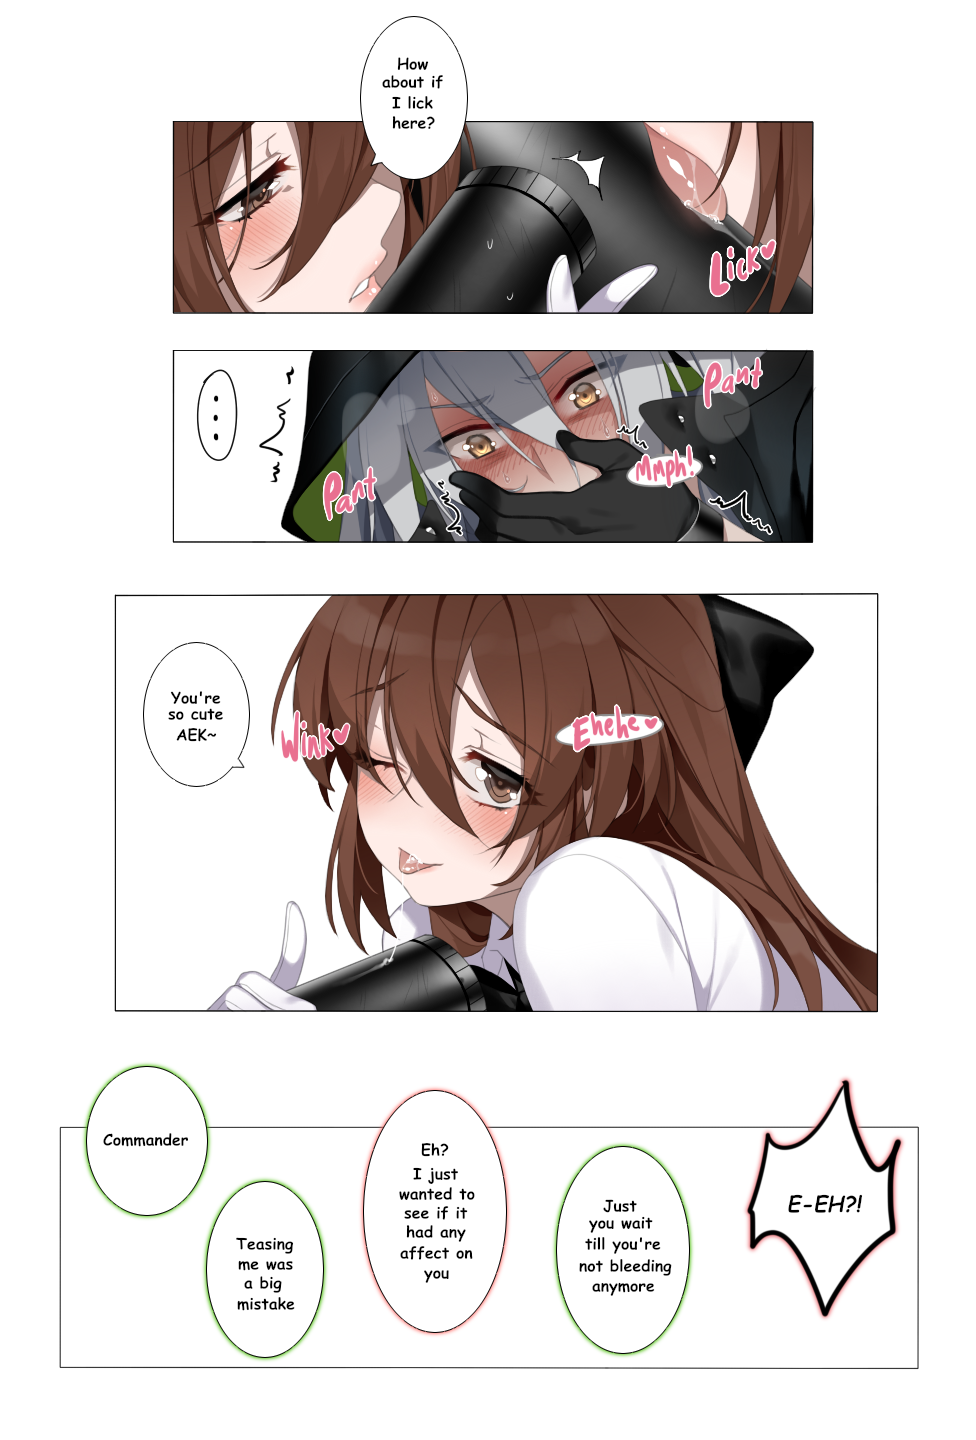 [deathALICE] Time of the Month (少女前線) [英語]